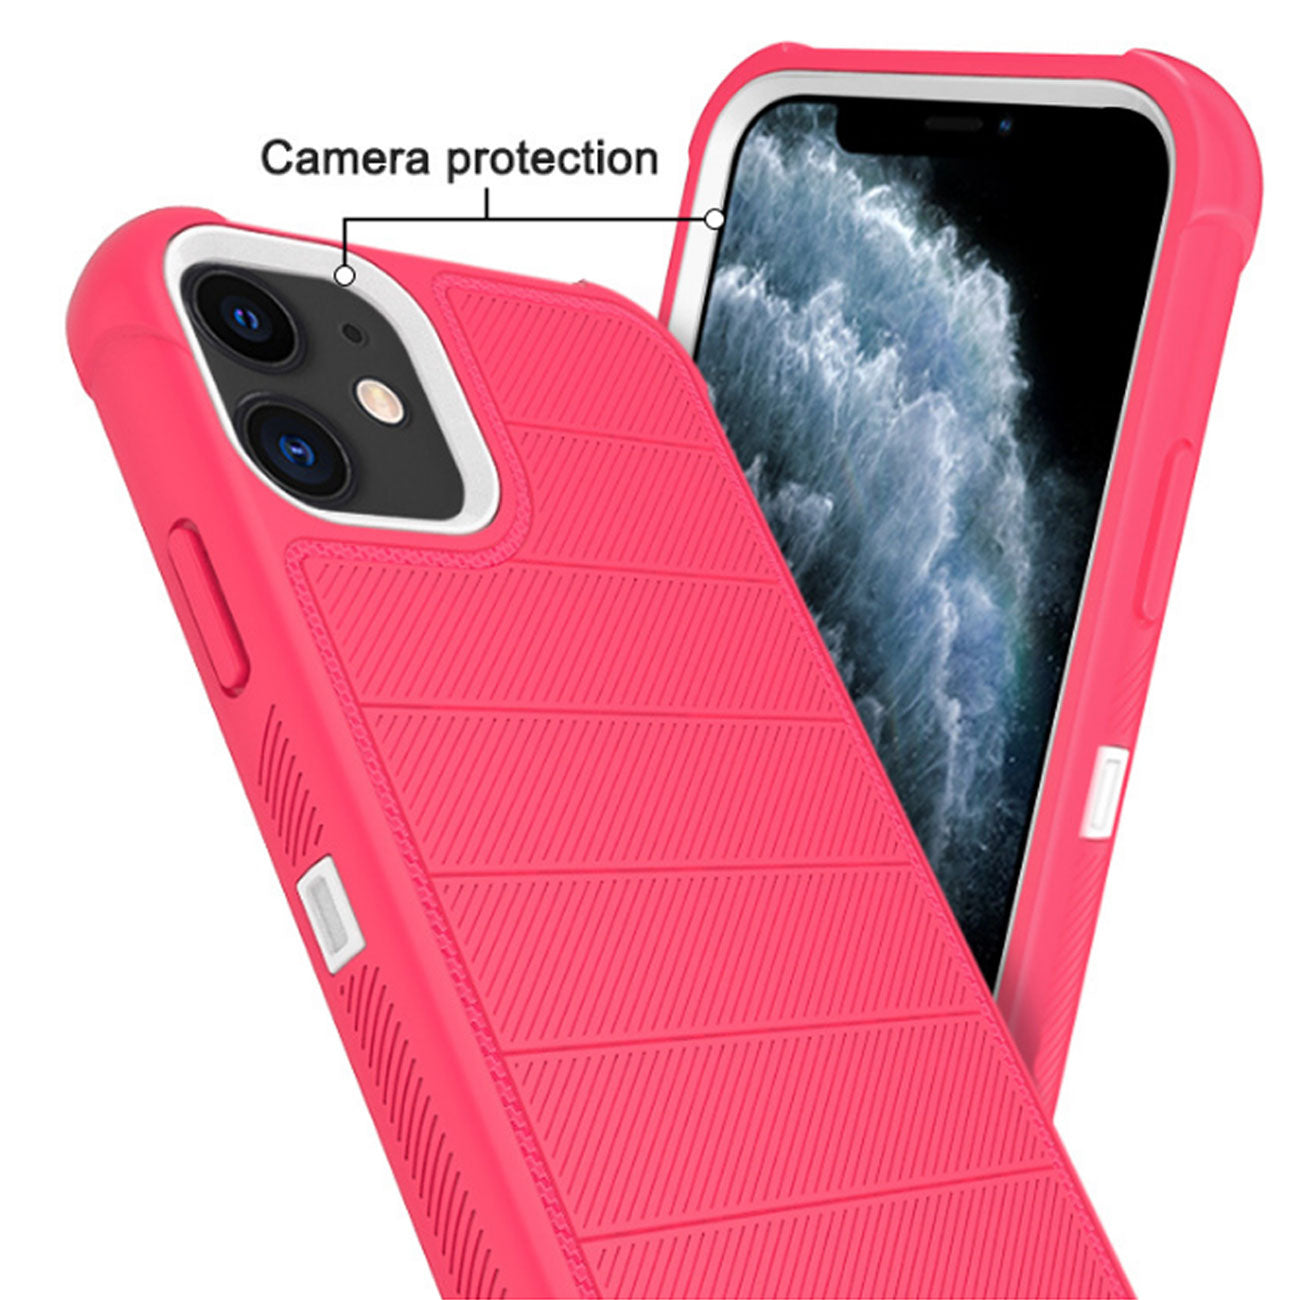 Case Holster Combo Hybrid 3-In-1 Heavy Duty Apple iPhone 11 Hot Pink Color